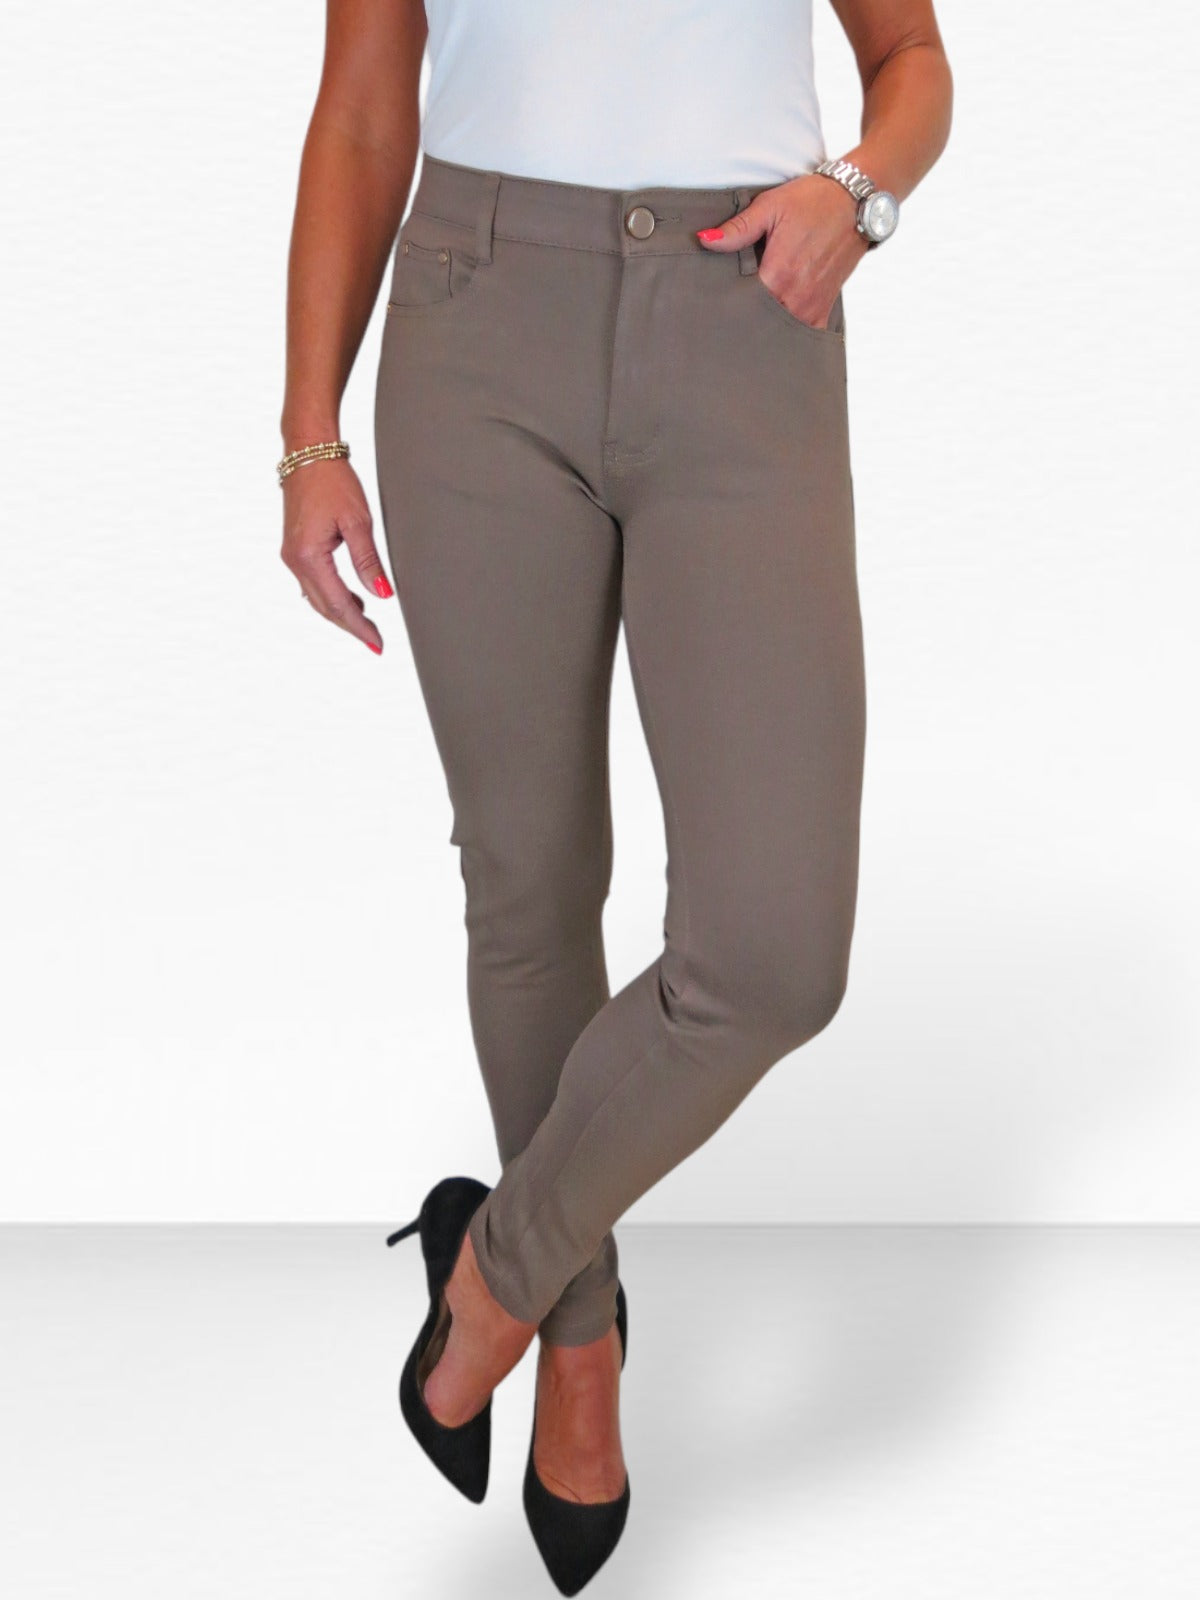 Womens Soft Stretch Ponte Trousers with Pockets Taupe Brown